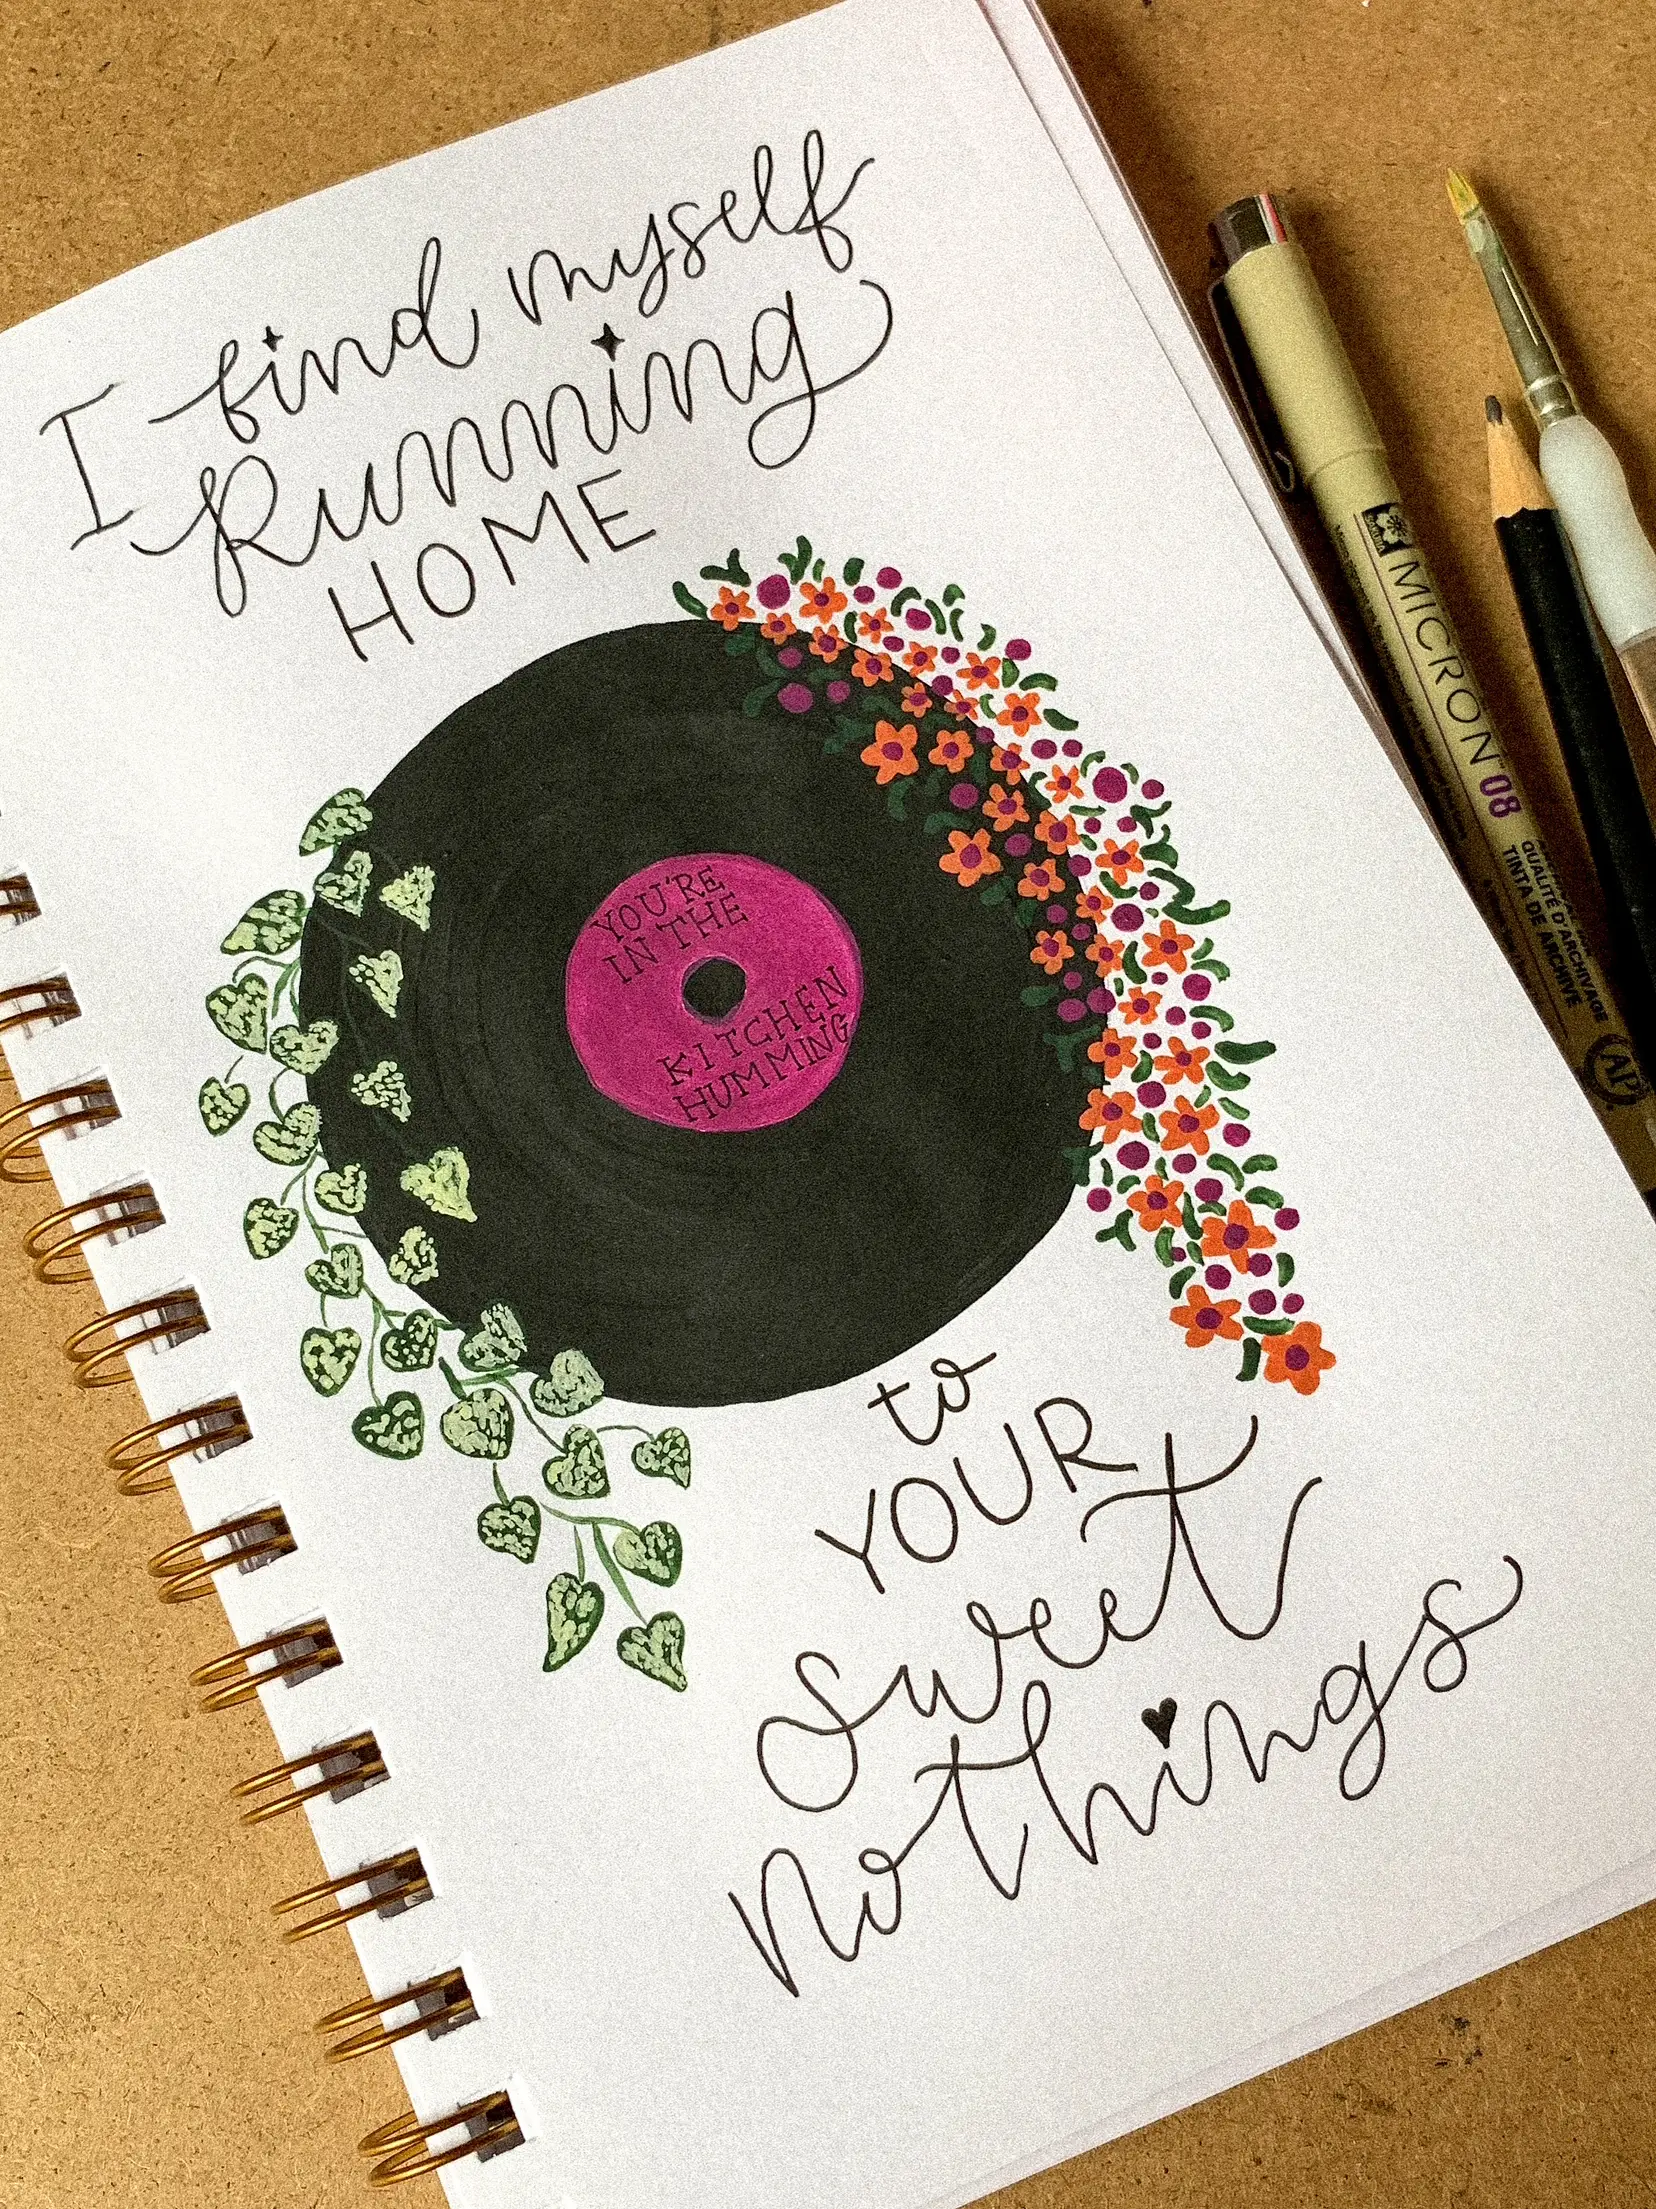 Taylor Swift Lyric Play, Gallery posted by SincerelySheri